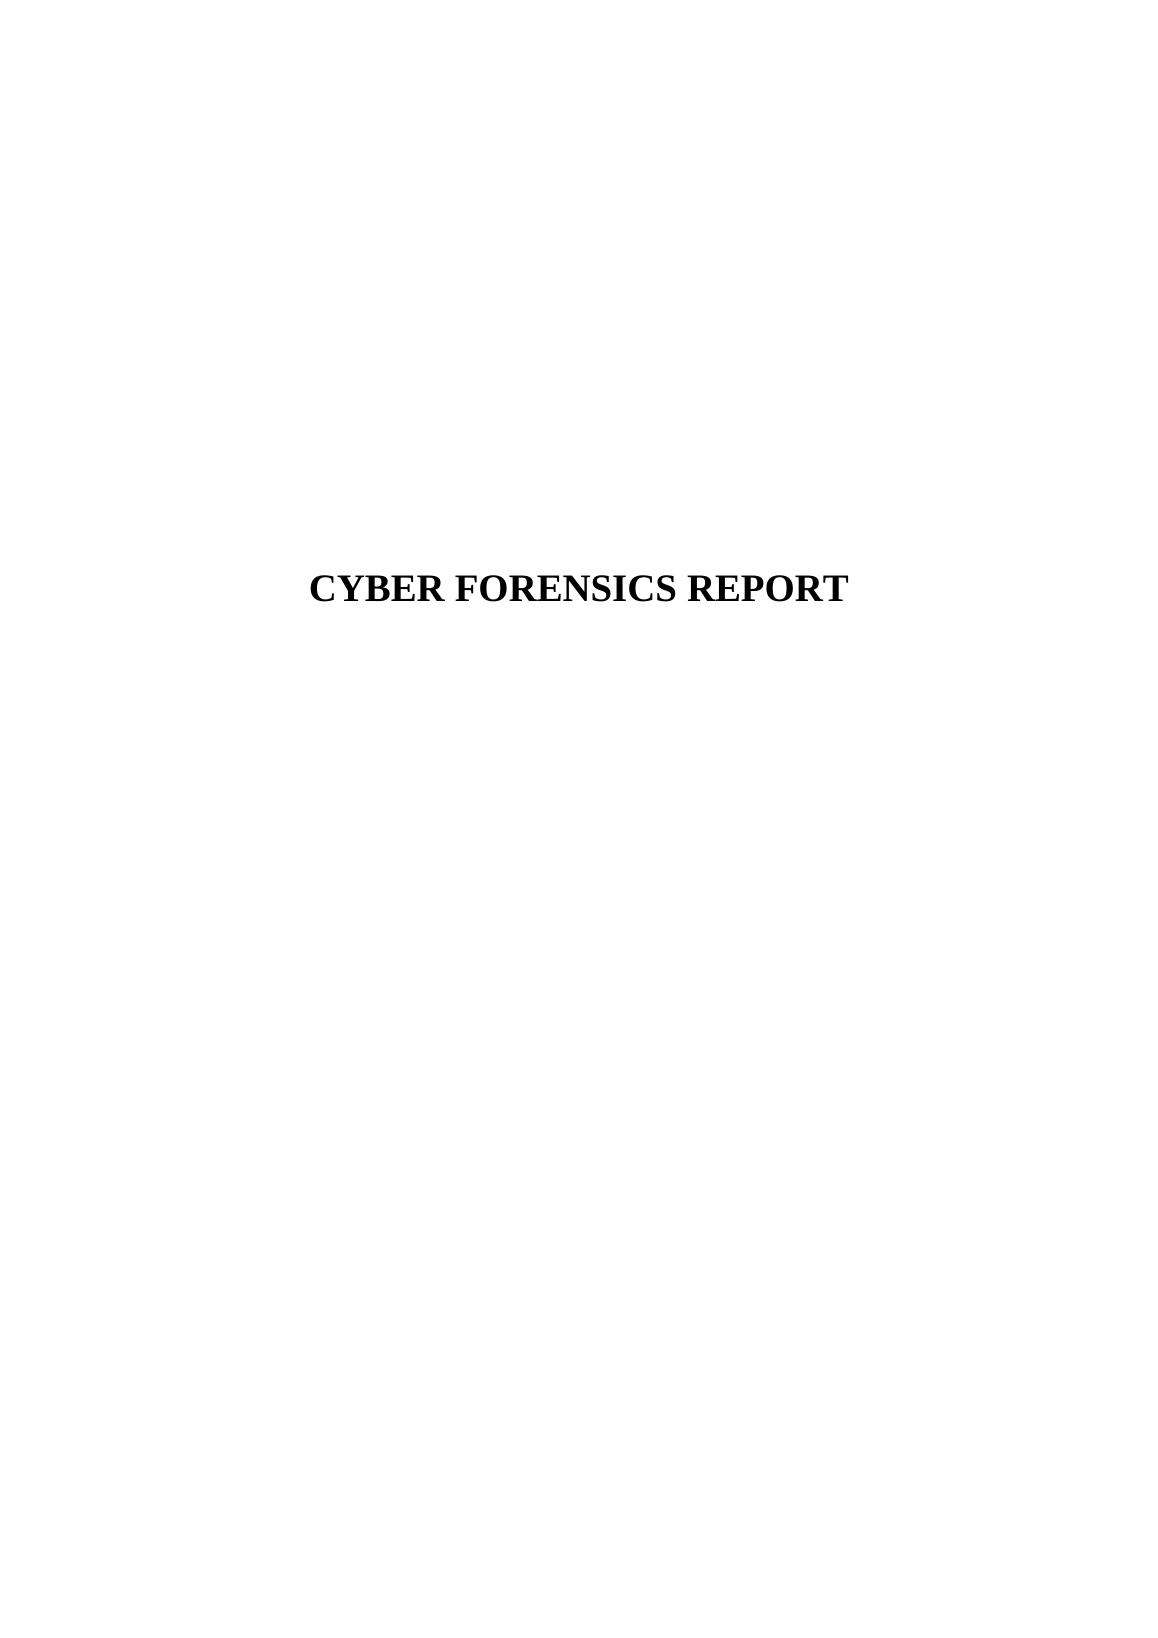 Report on Case in Cyber Forensics_1